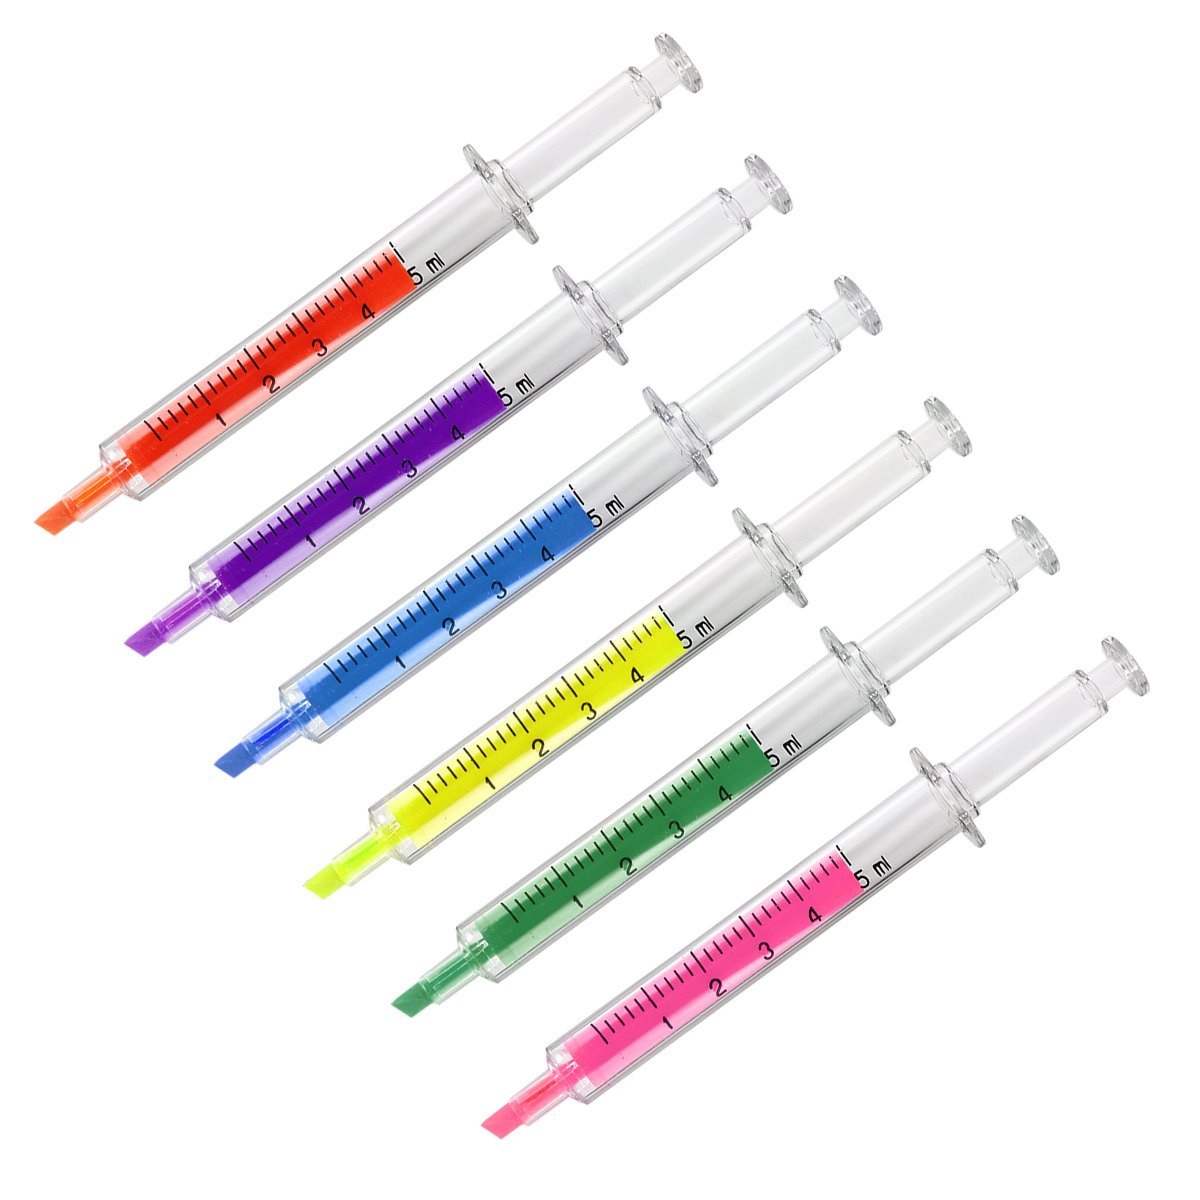 Syringe Highlighters in 6 colors: $6.99 on Amazon